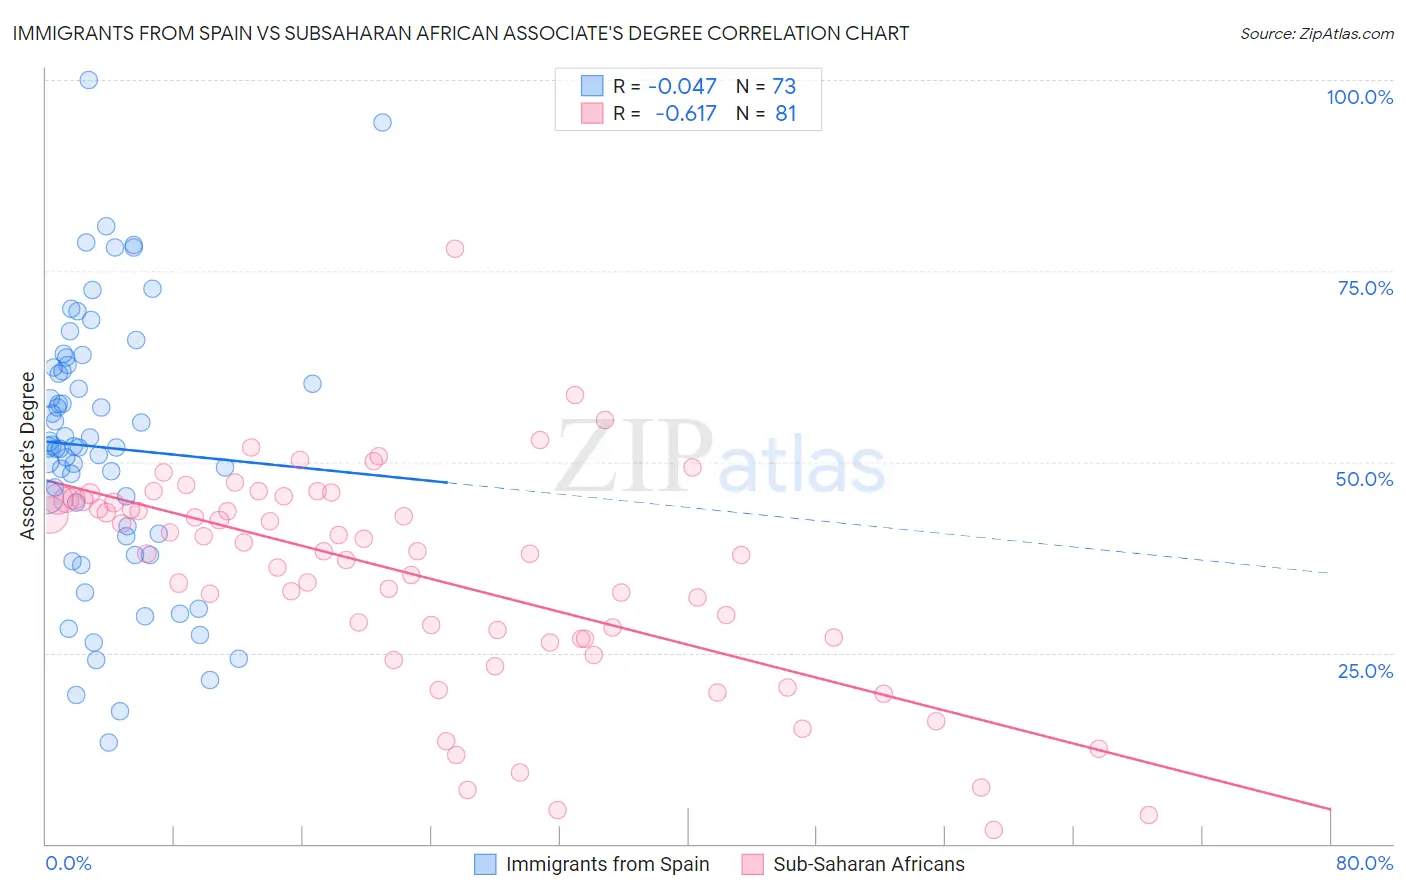 Immigrants from Spain vs Subsaharan African Associate's Degree